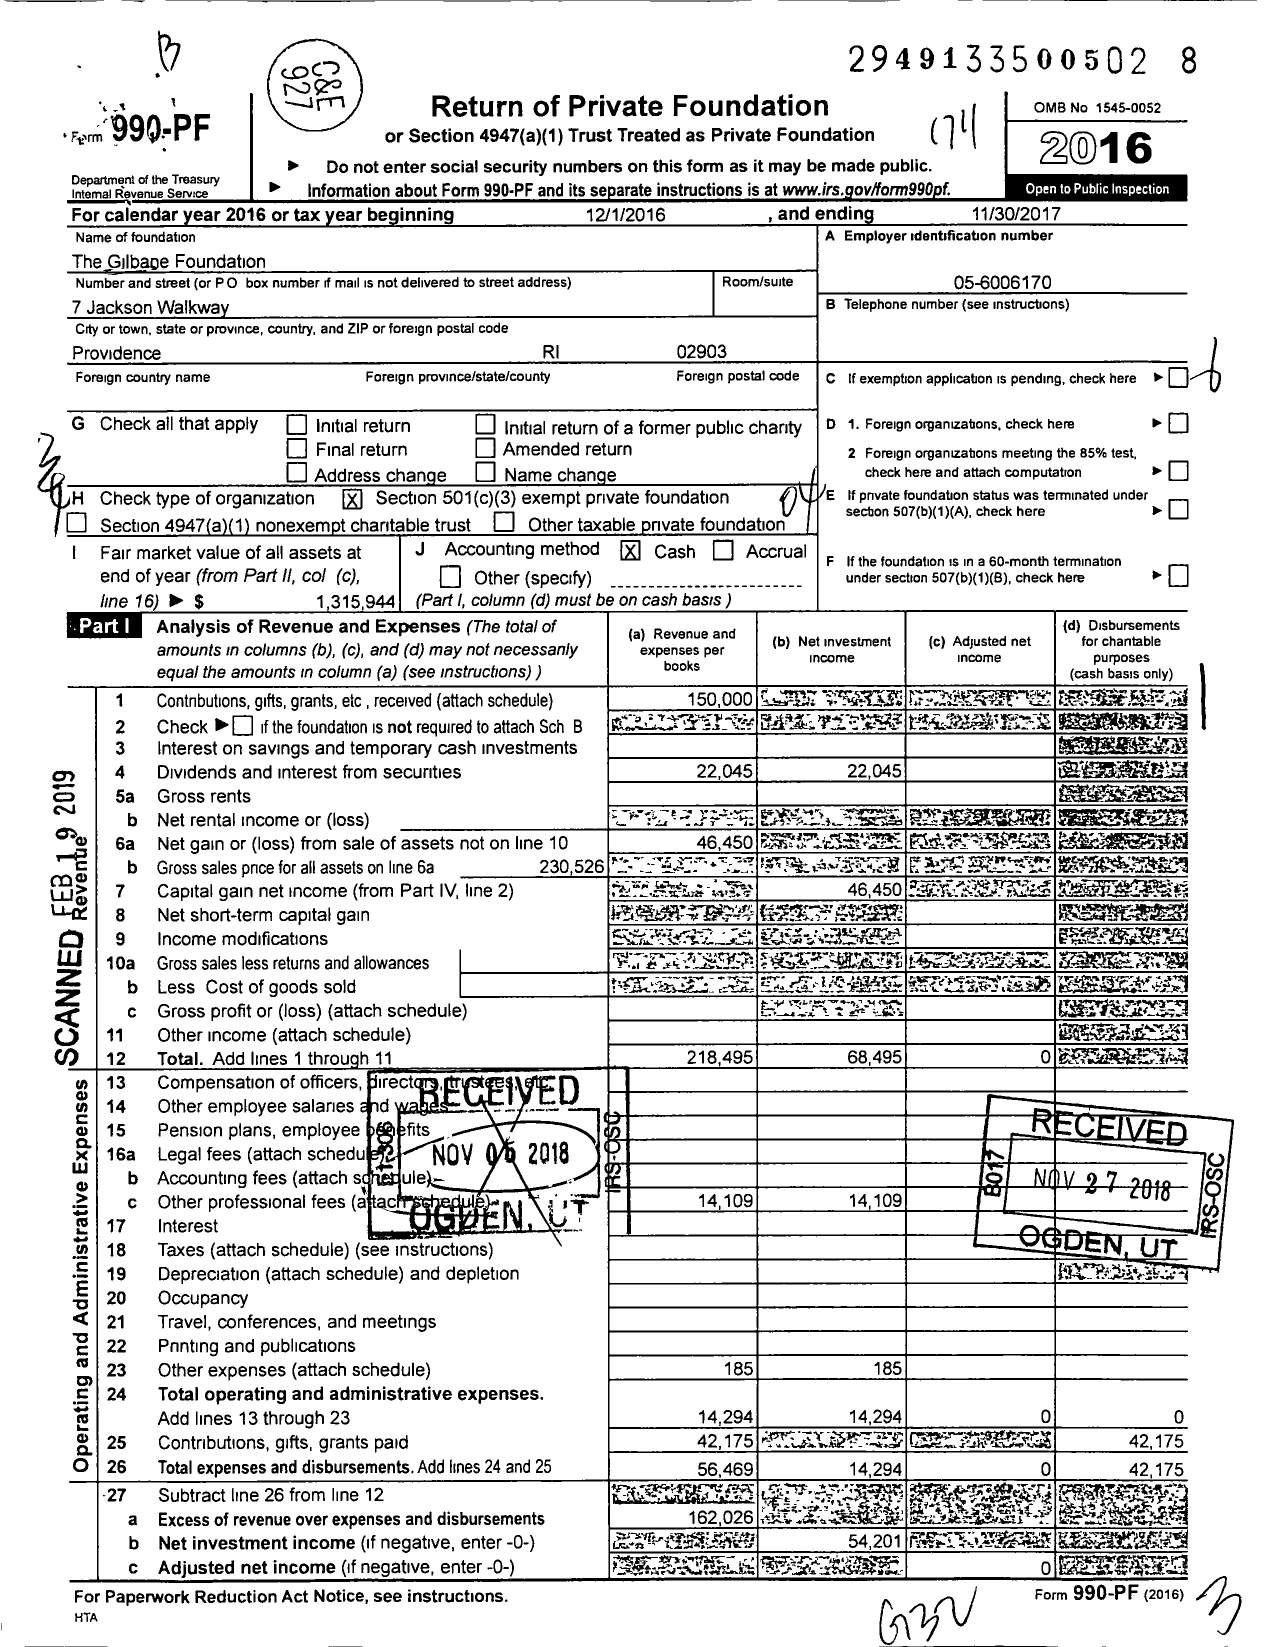 Image of first page of 2016 Form 990PF for The Gilbane Family Foundation